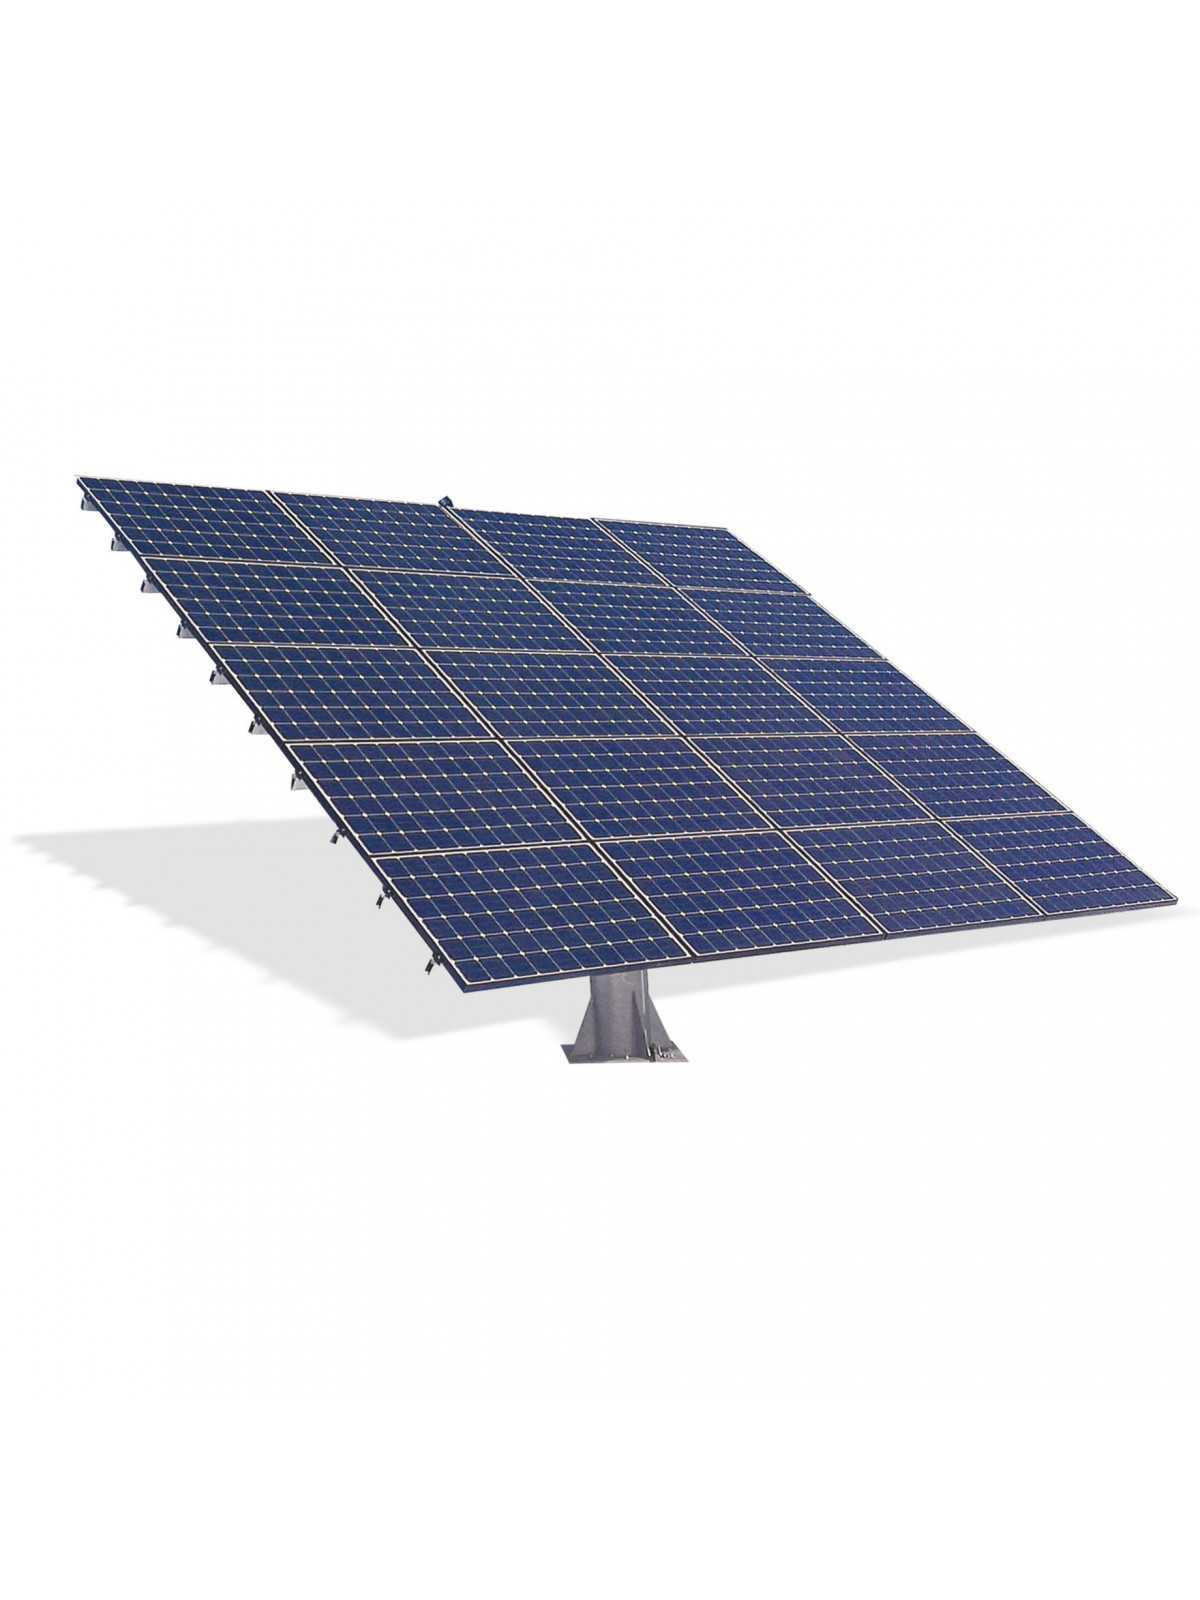 2-axis photovoltaic tracker: 36 panels